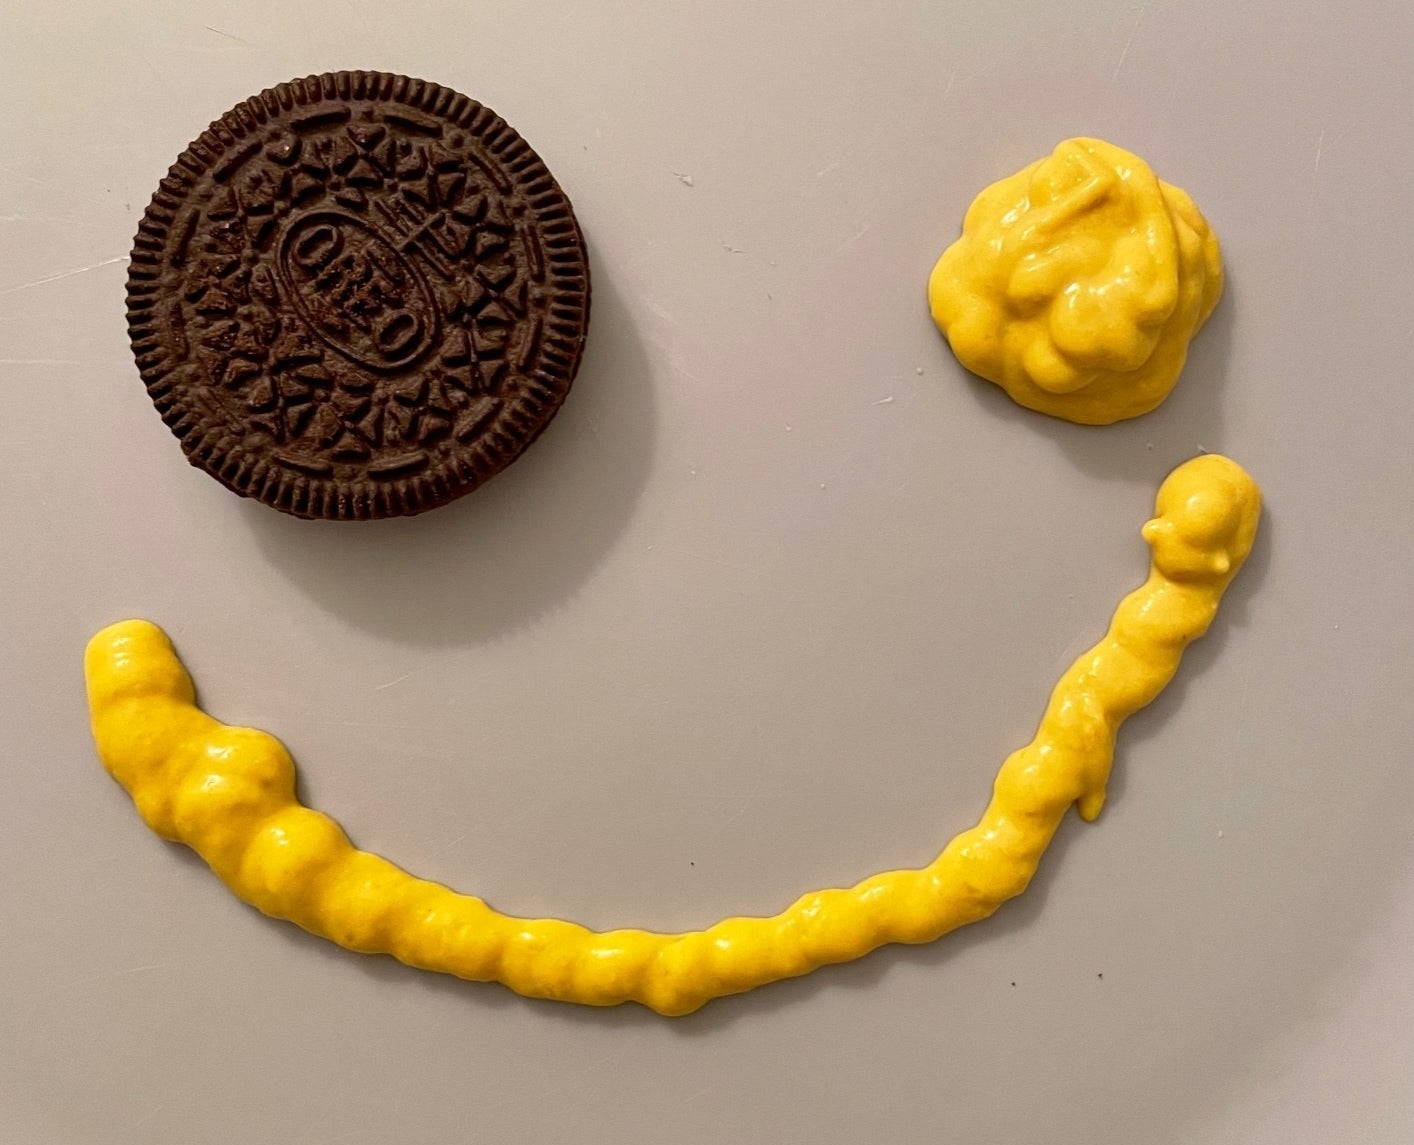 An Oreo with mustard